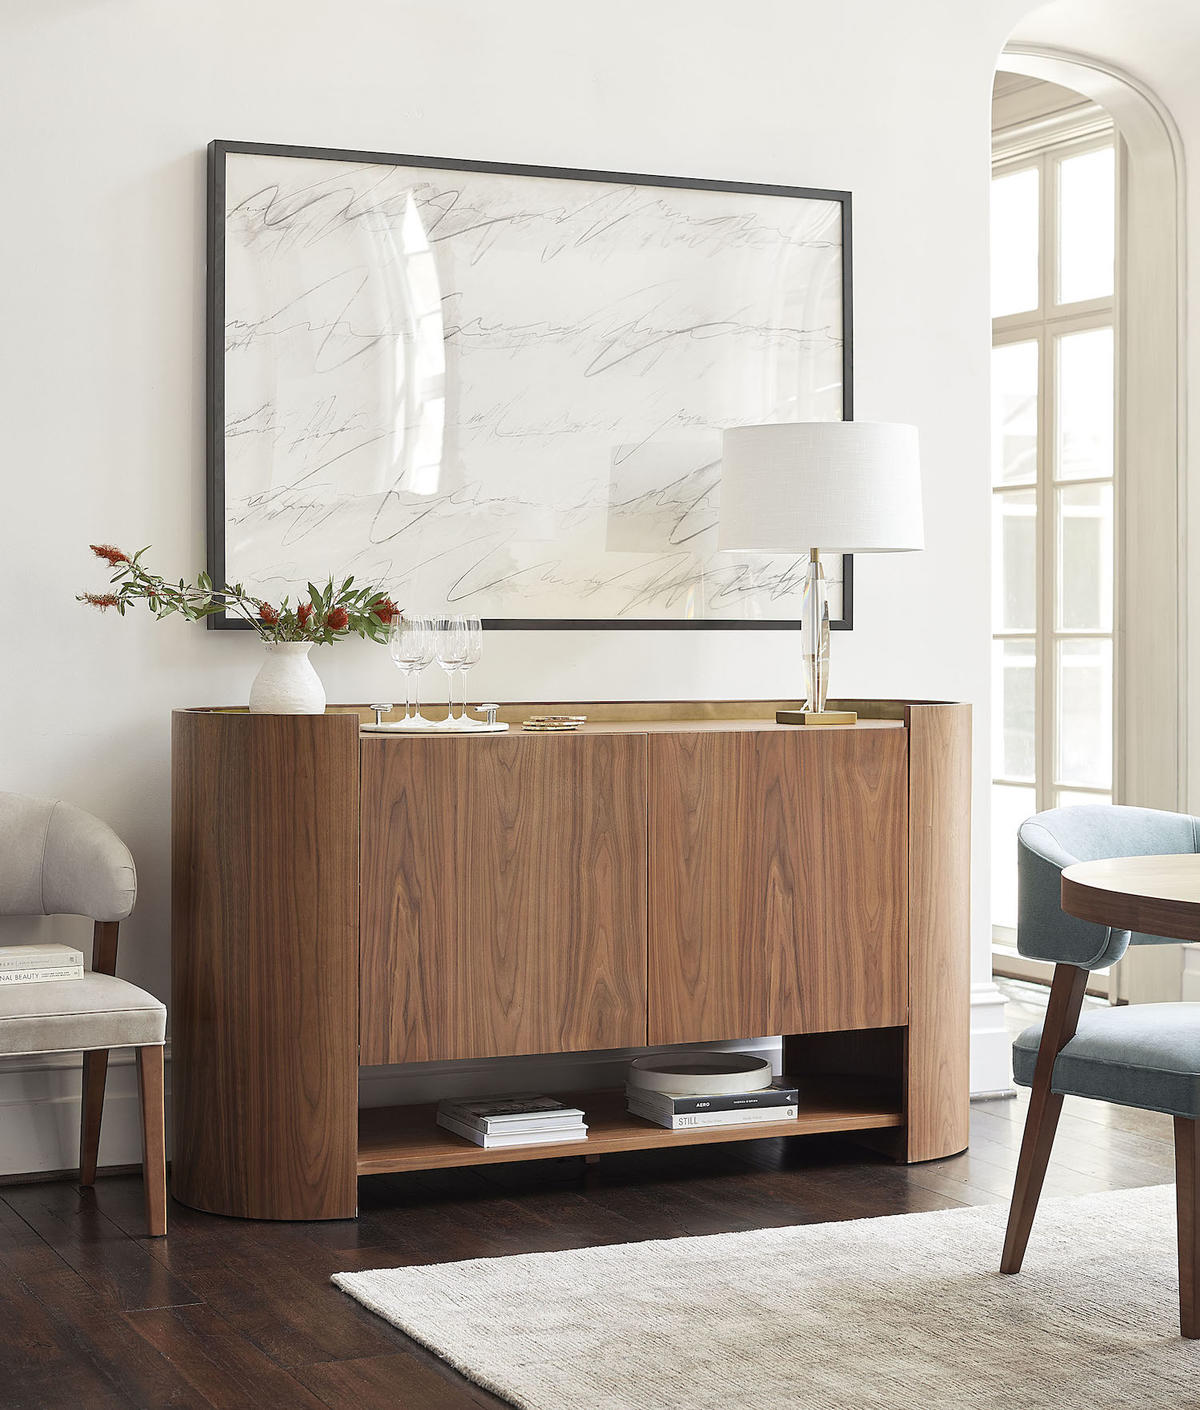 Curves ahead: 9 shapely furniture pieces to soften up a space